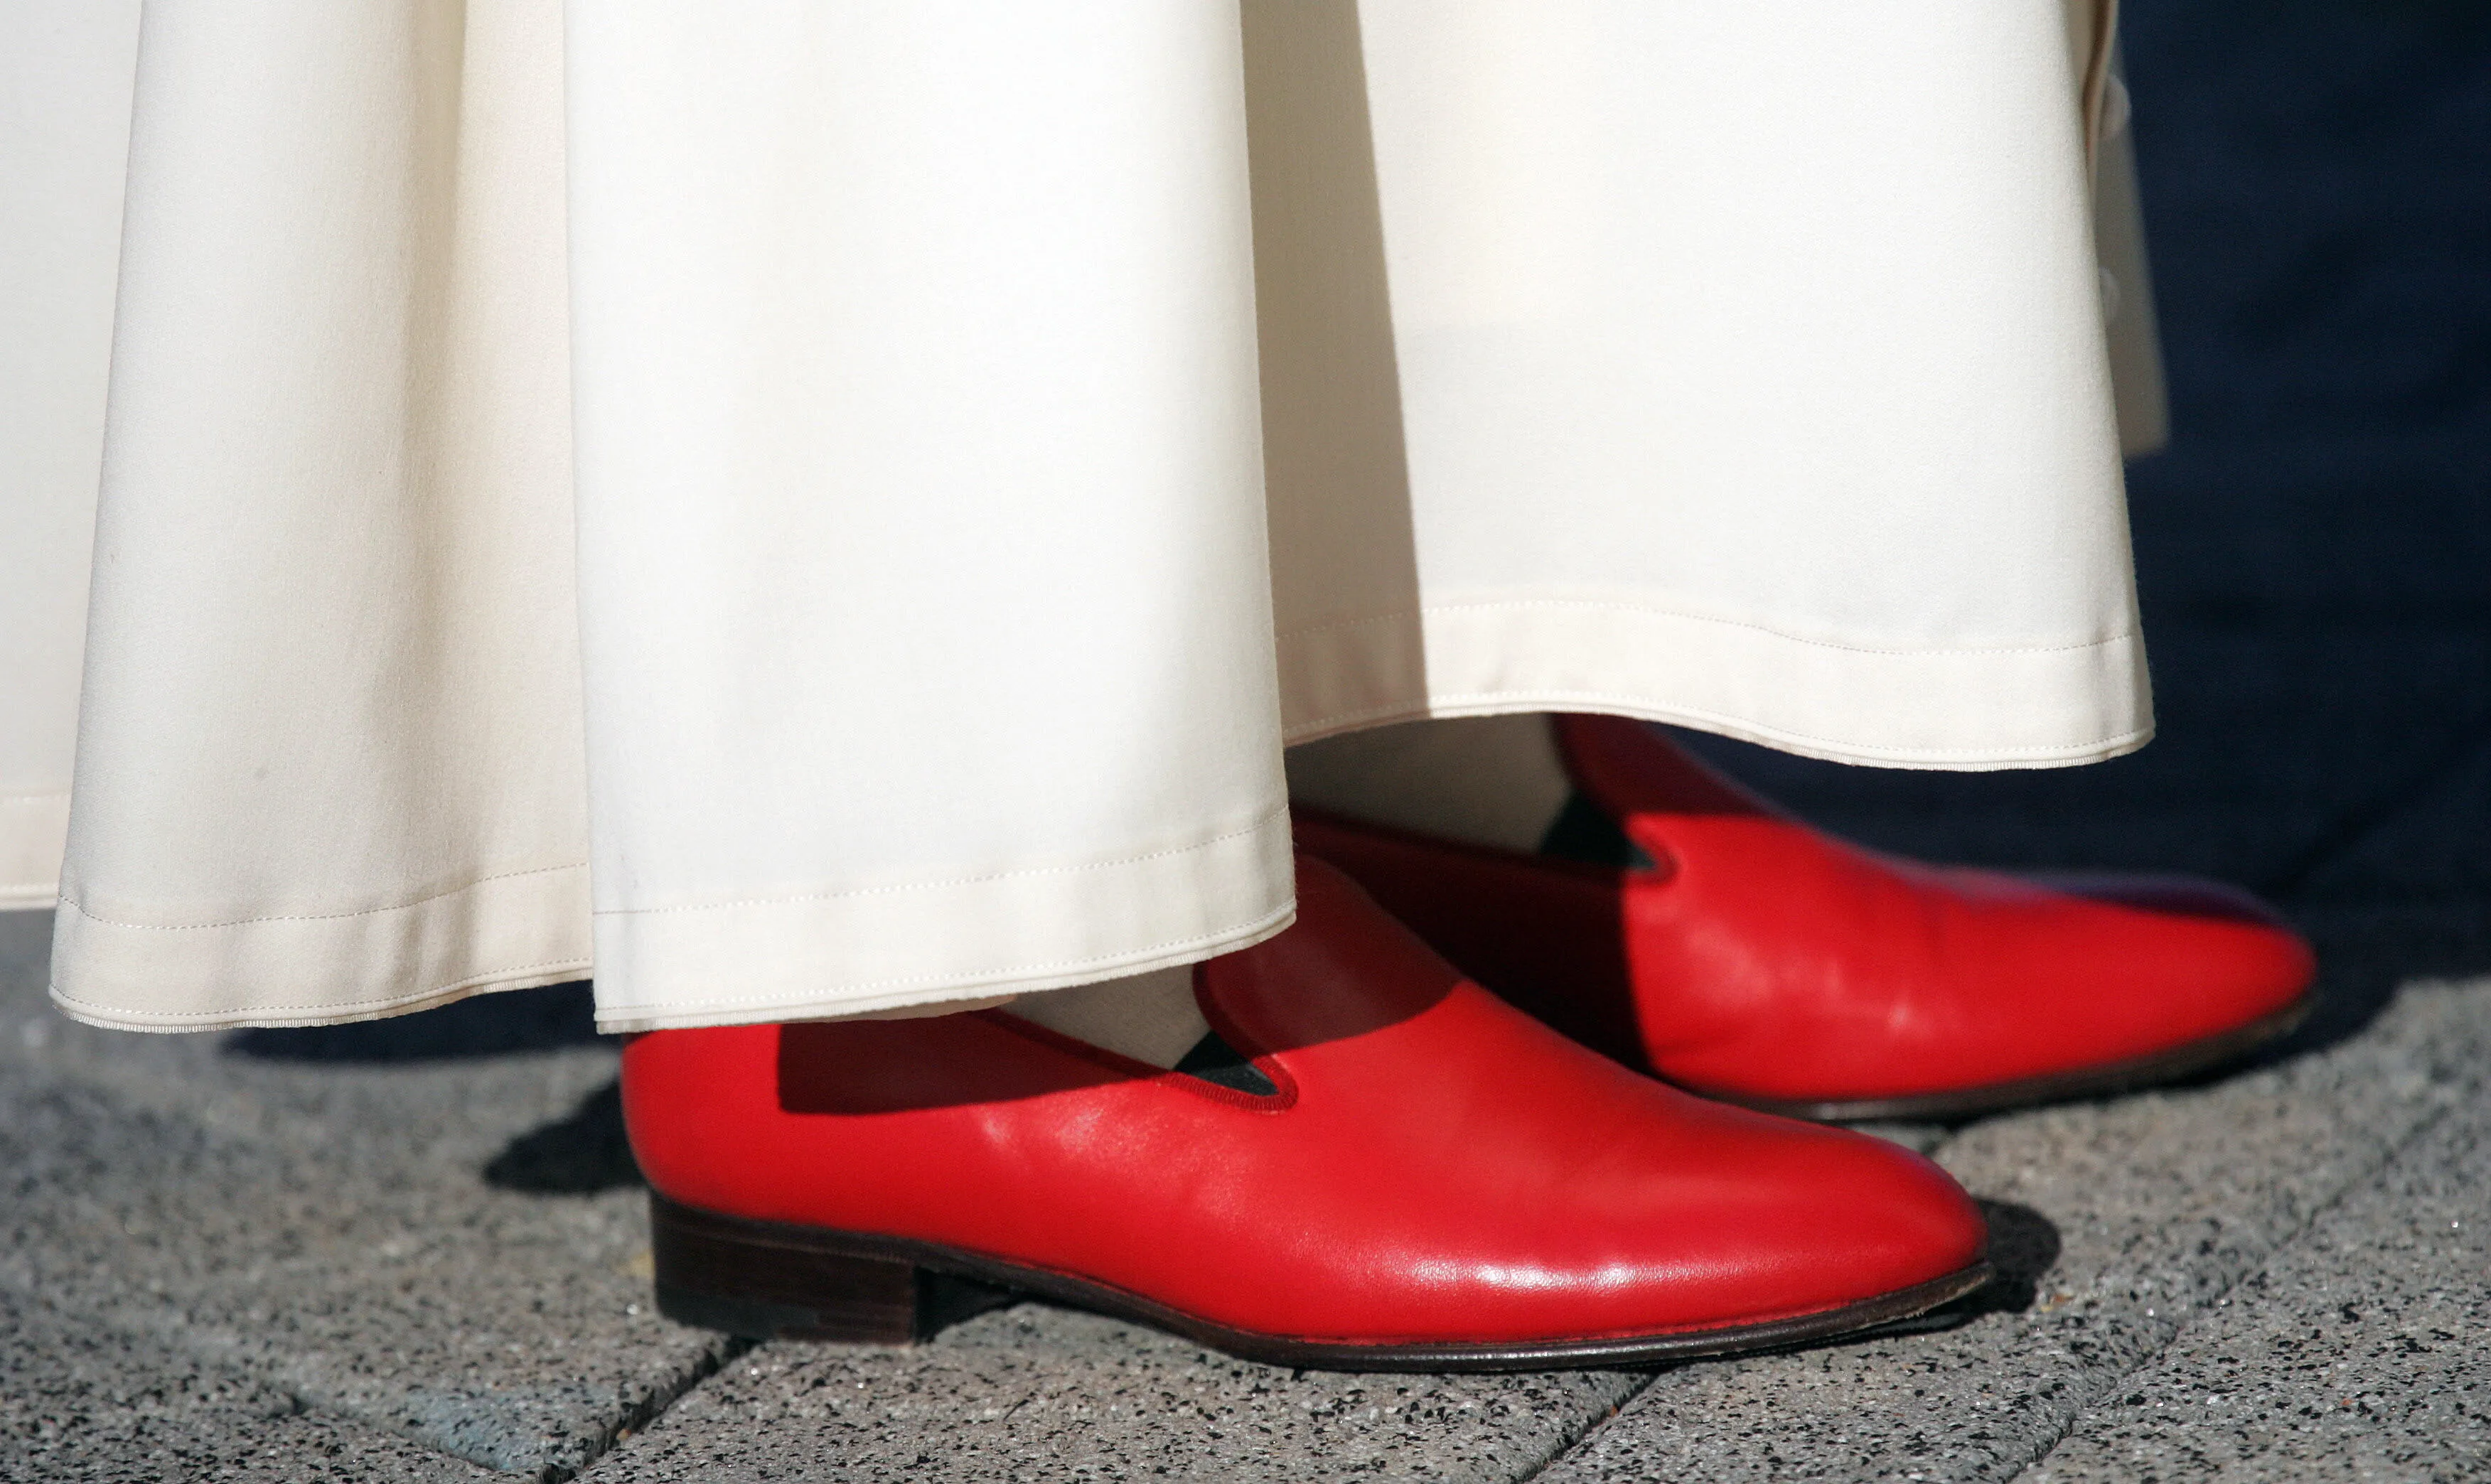 Pope Benedict XVI wearing brilliant red shoes arrives to attend an interreligious gathering at the Pope John Paul II Cultural Center on April 17, 2008, in Washington, D.C.?w=200&h=150